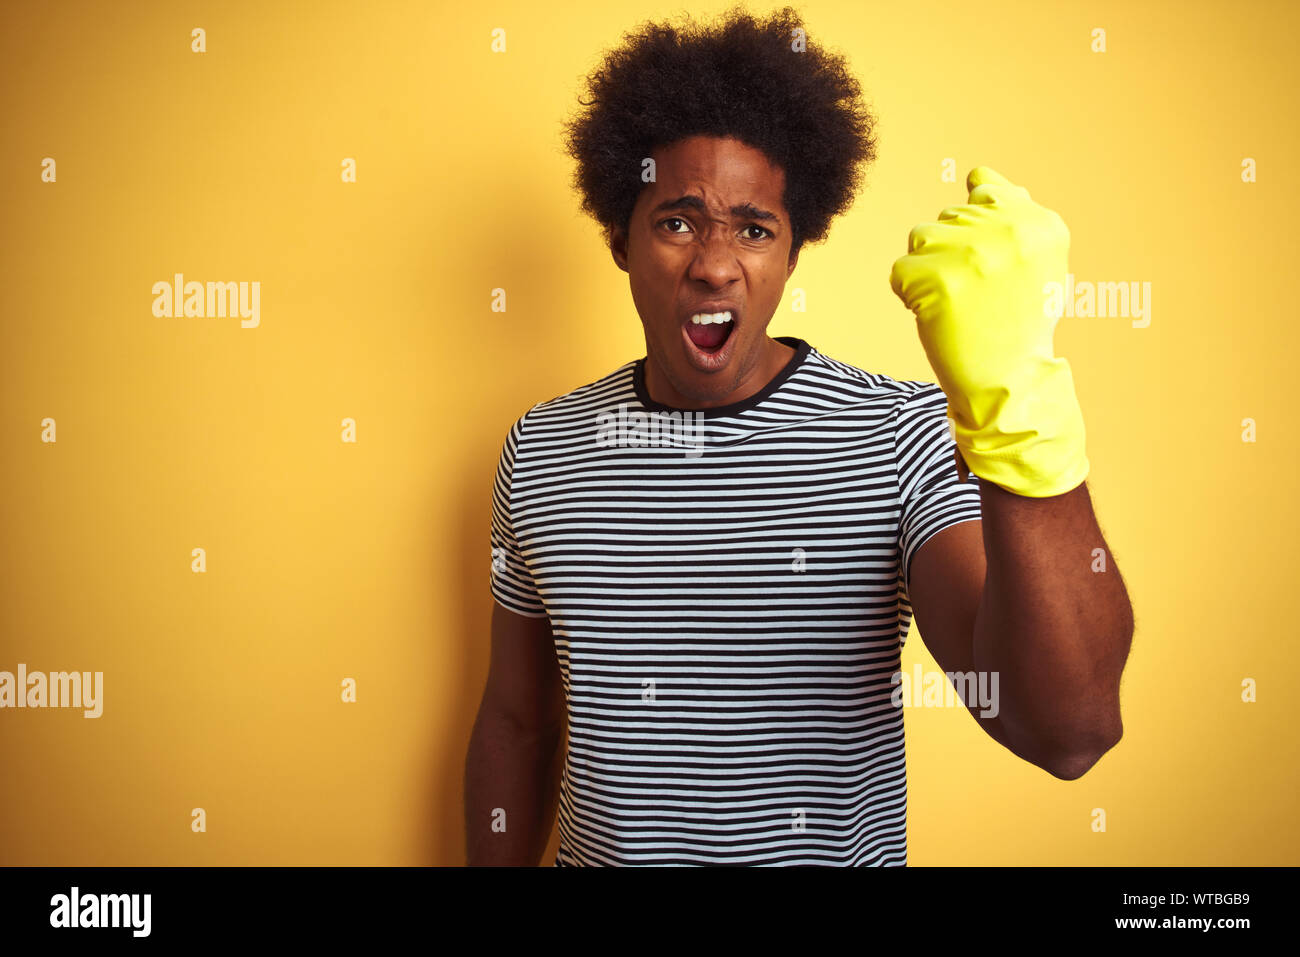 Young african american man cleaning using gloves standing over isolated yellow background annoyed and frustrated shouting with anger, crazy and yellin Stock Photo